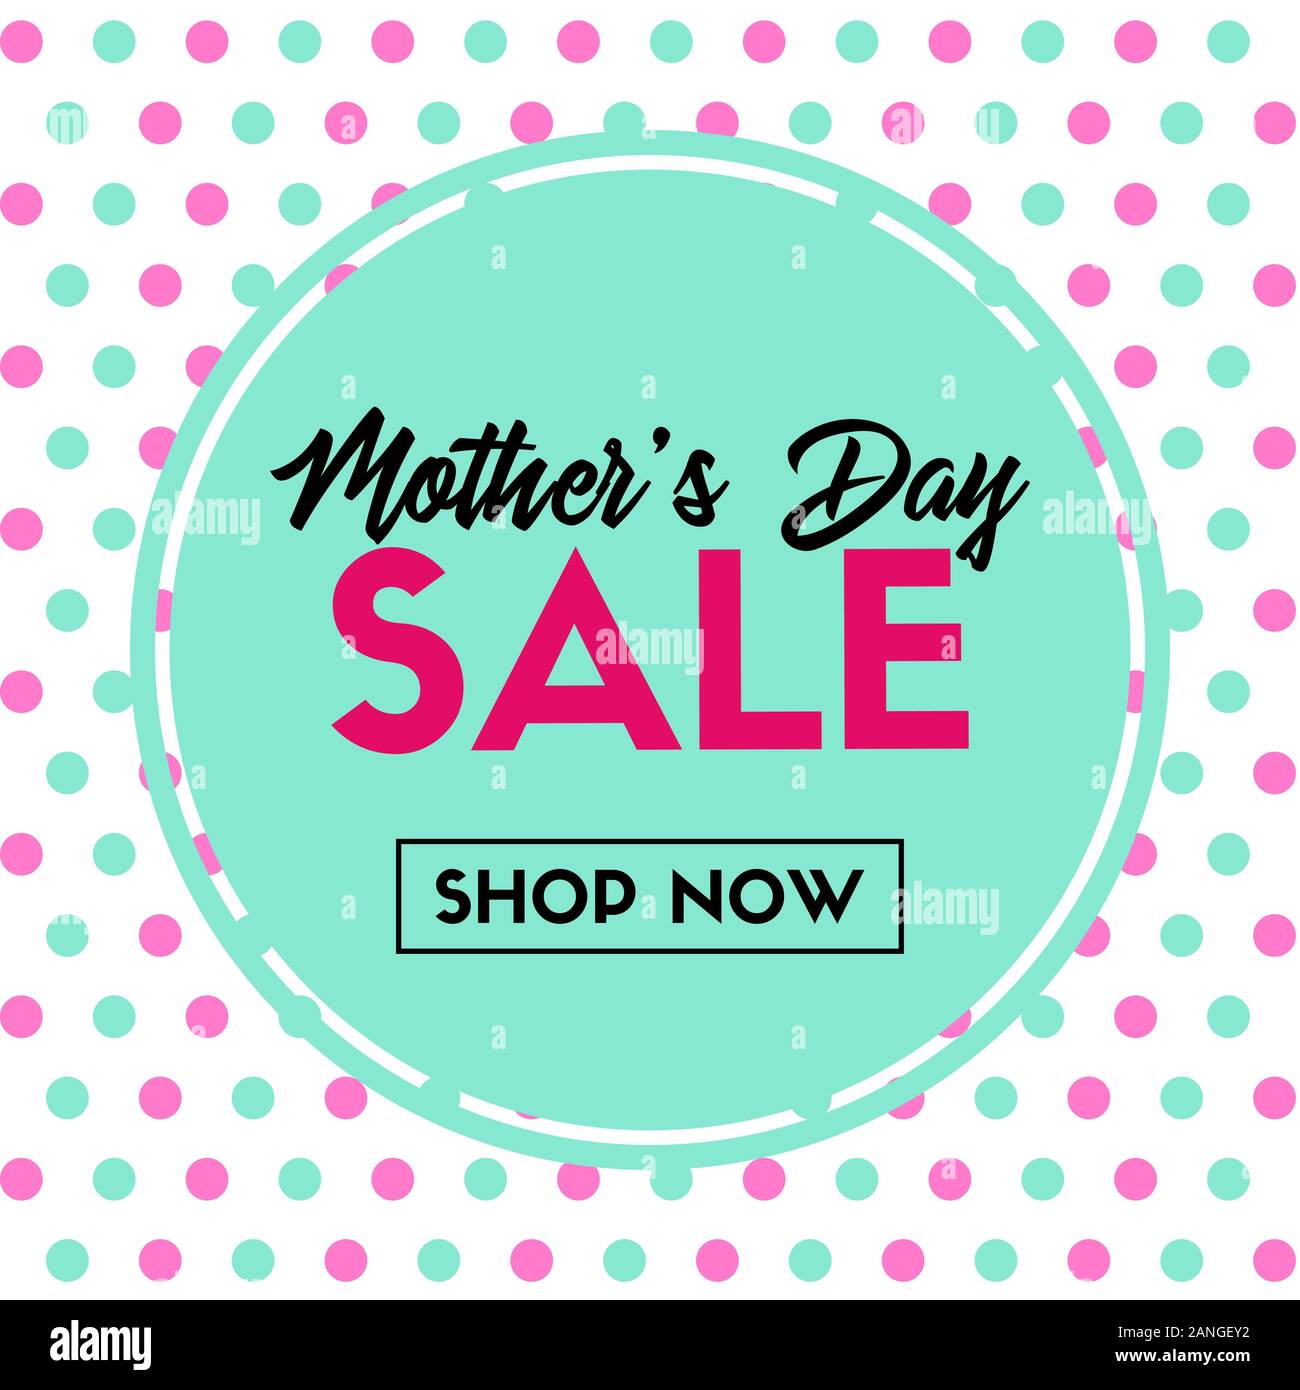 Mothers day sale vector banner. Shop now Stock Vector